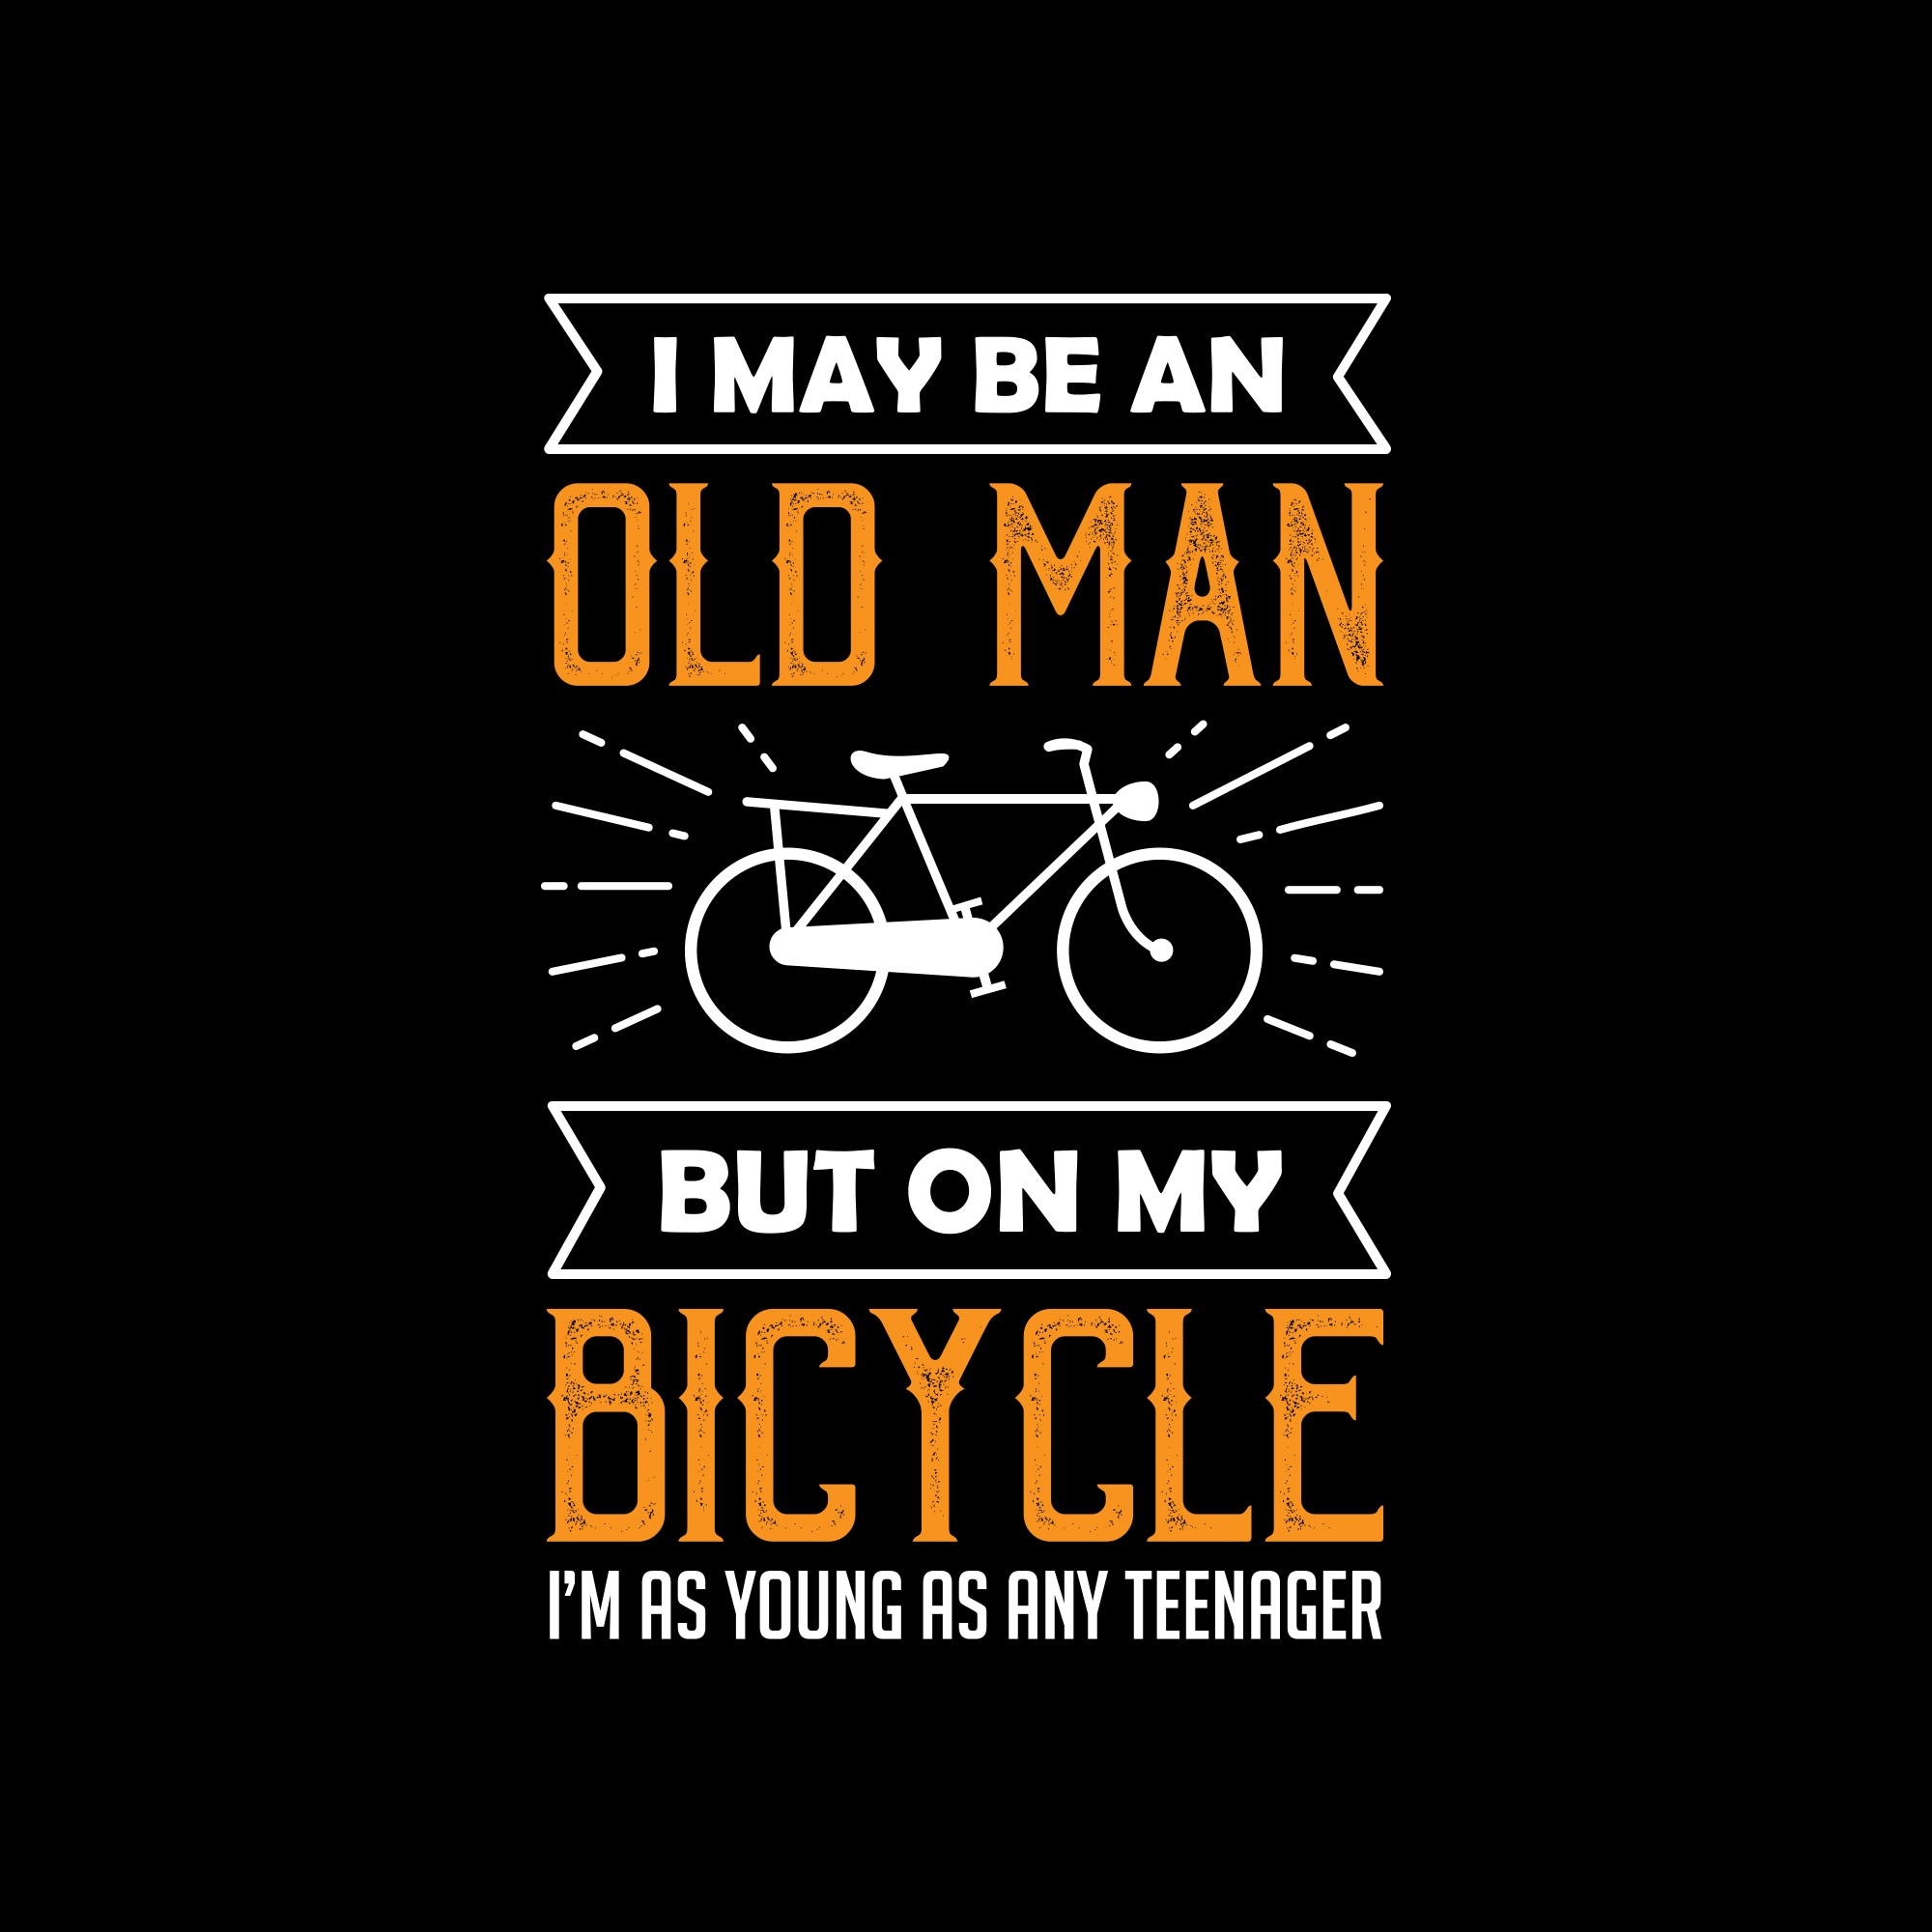 World Bicycle Day 2022 Wishes, Greetings, Whatsapp Status, Images and Quotes that you can share with your loved ones.  (Image: Shutterstock) 